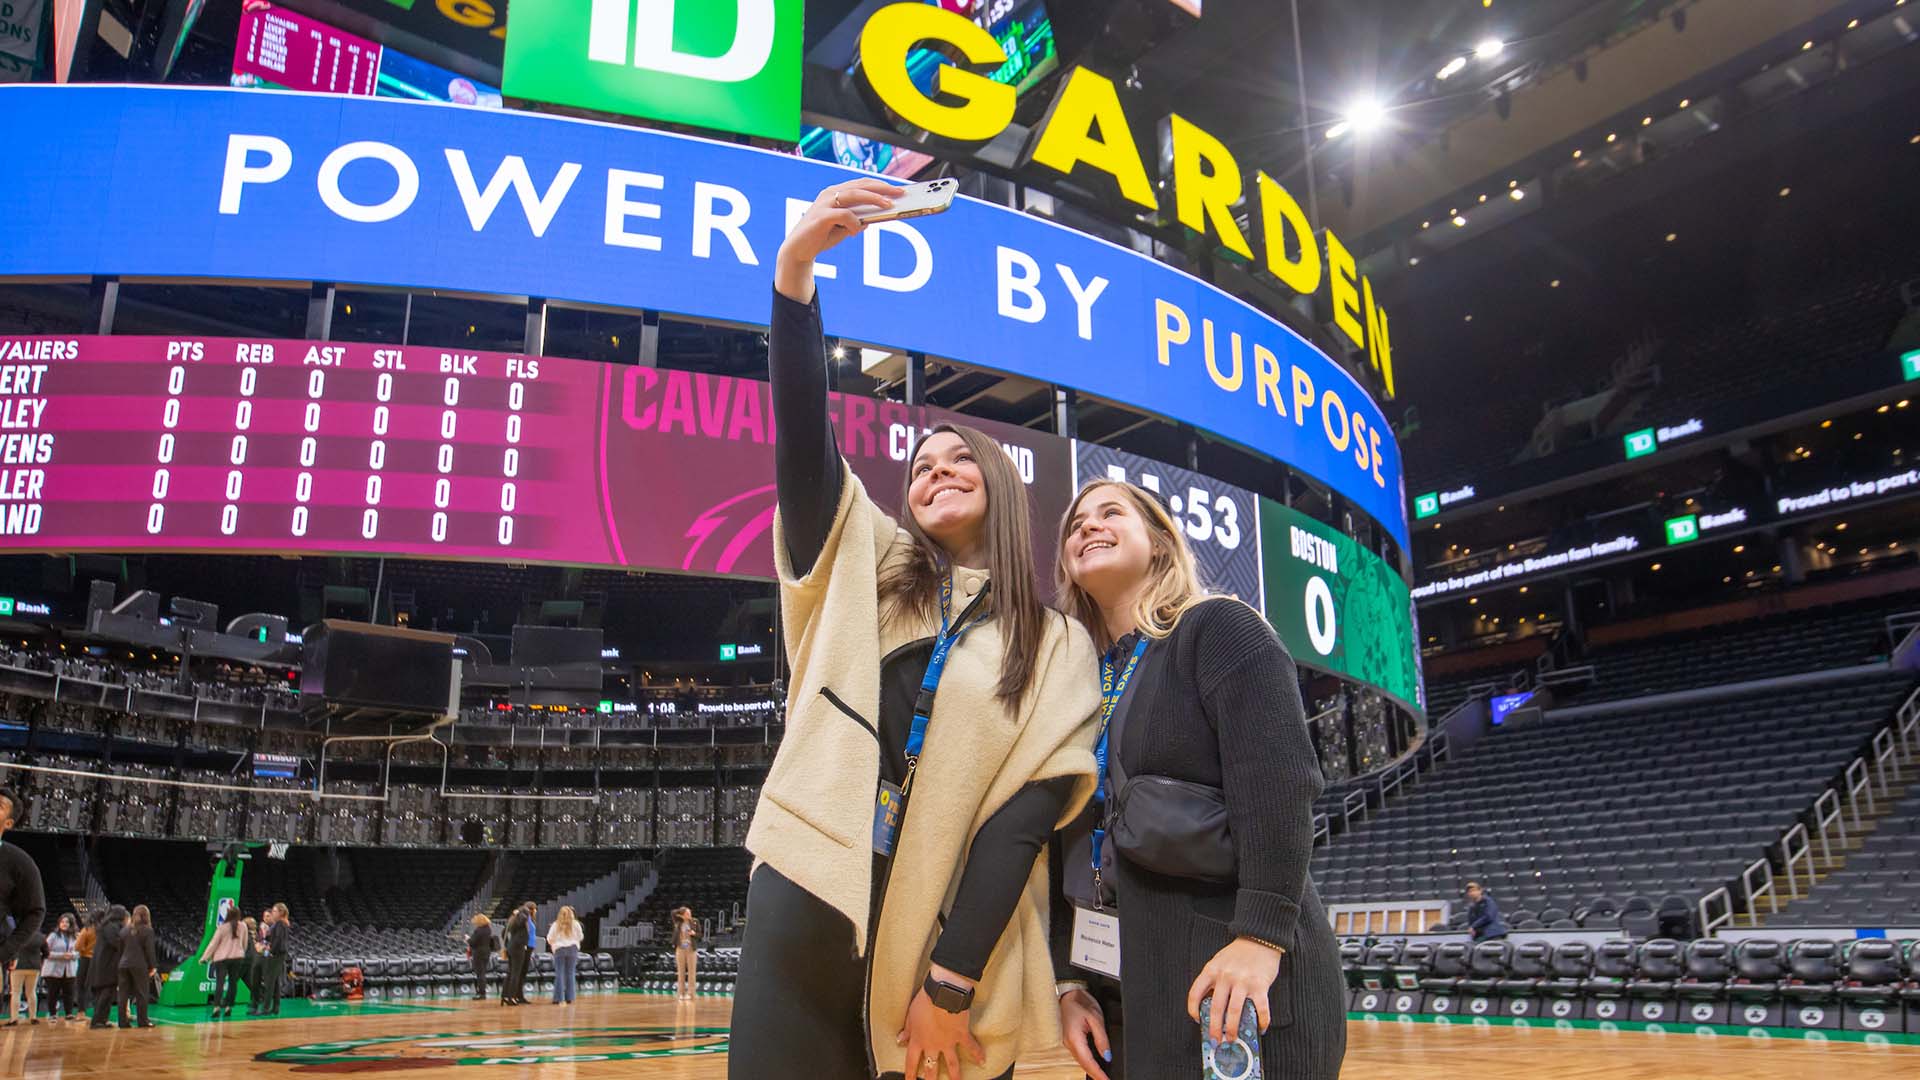 Two students take a selfie in front of the jumbotron at TD Garden